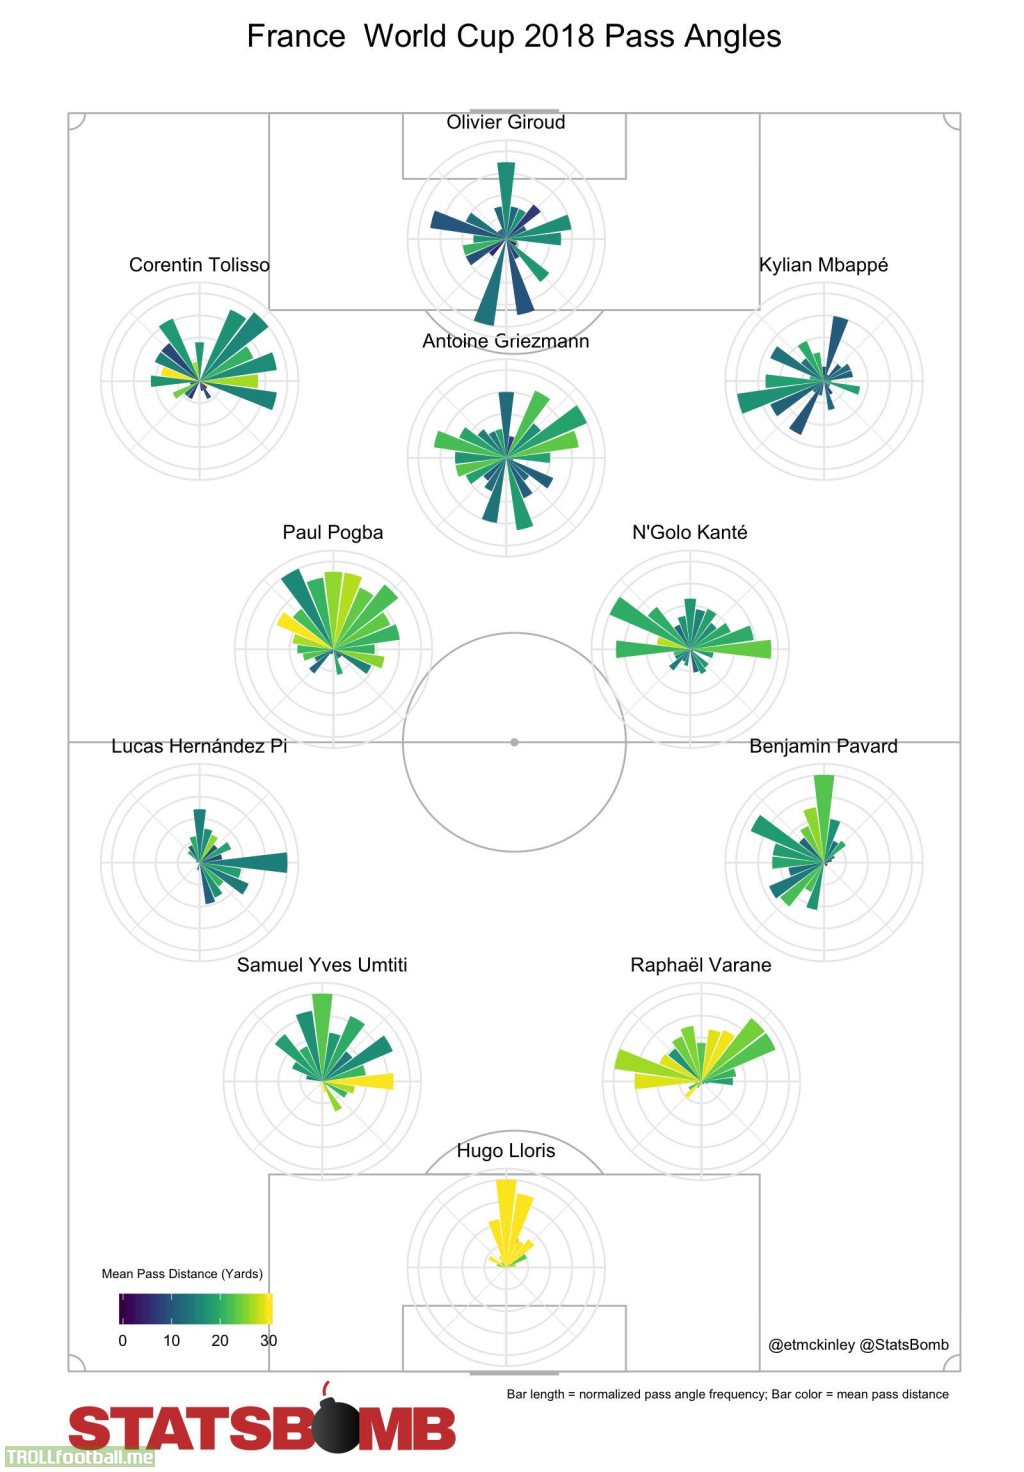 Cool pass angle visualization of France's World Cup lineup [@etmckinley]